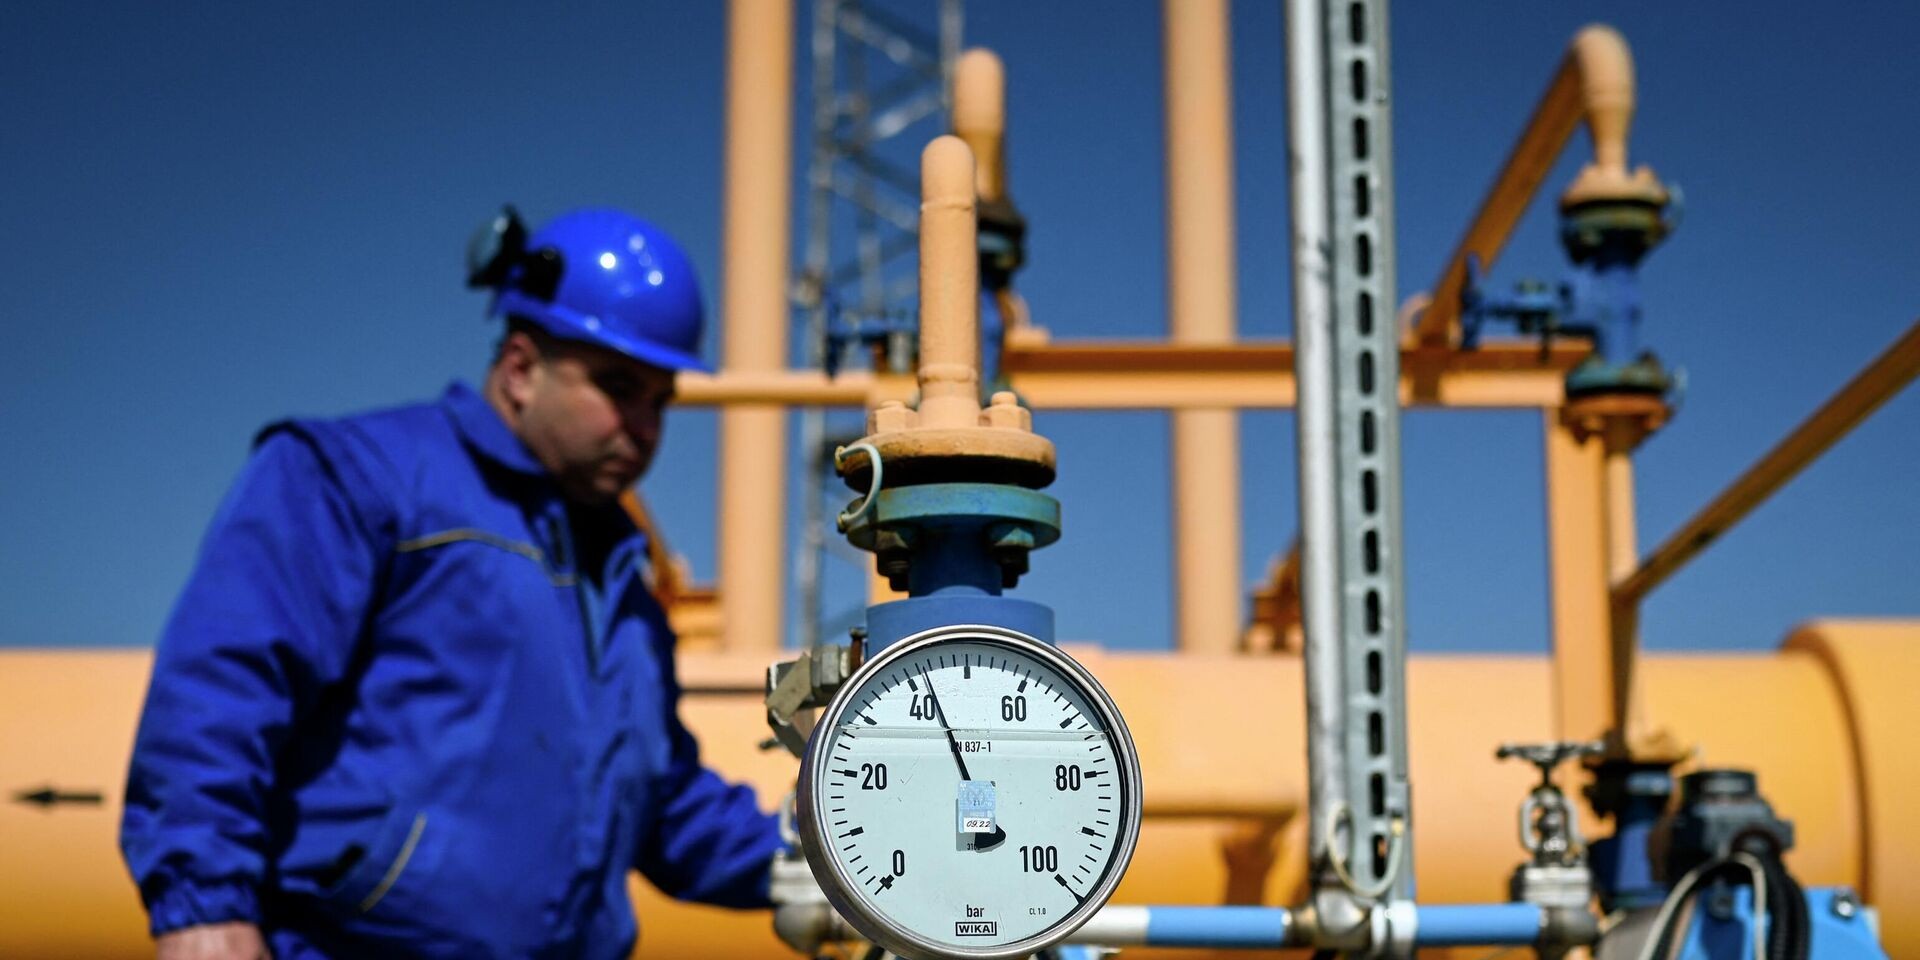 Kazakhstan intends to exceed the plan for oil transit from Russia to Uzbekistan